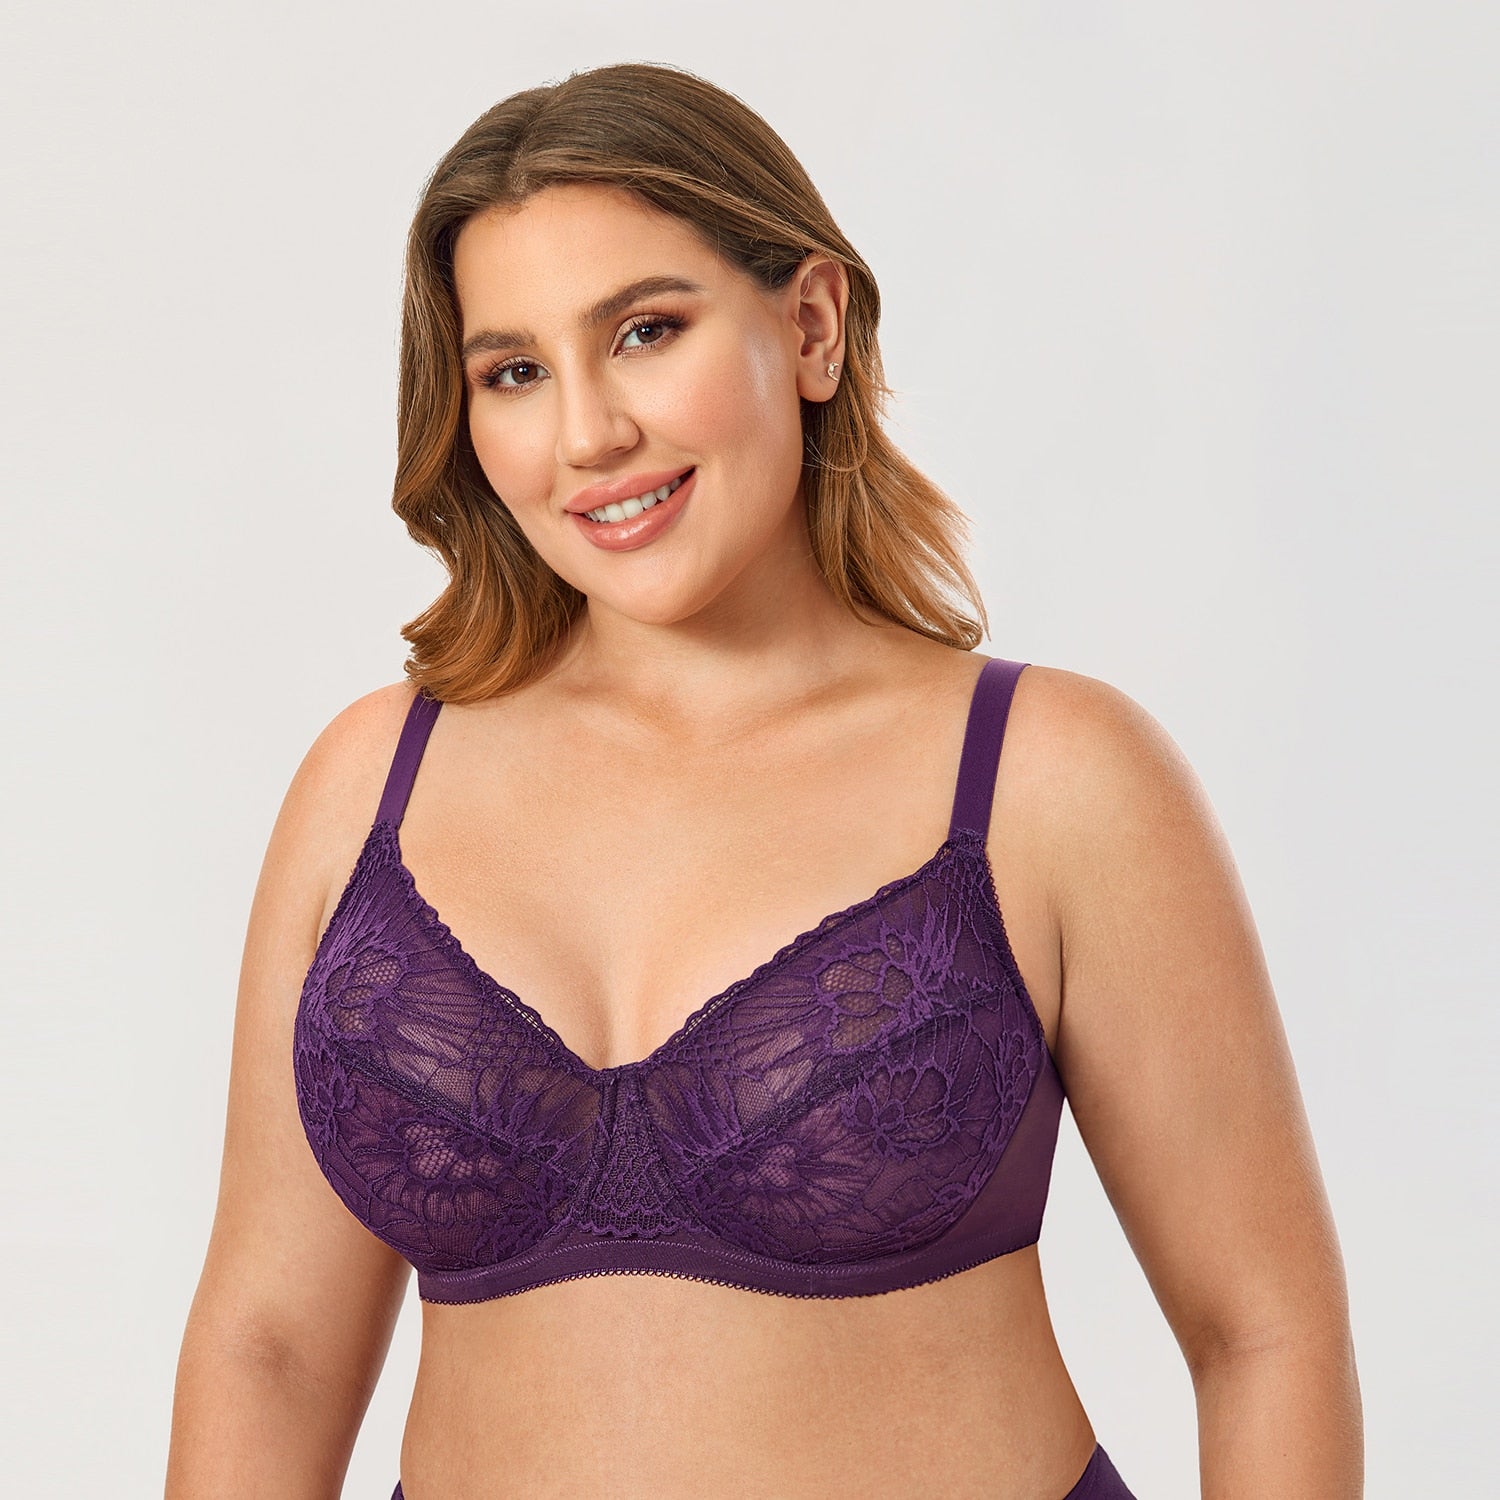  Womens Plus Size Bras Full Coverage Lace Underwire Unlined  Bra Eggplant 44G